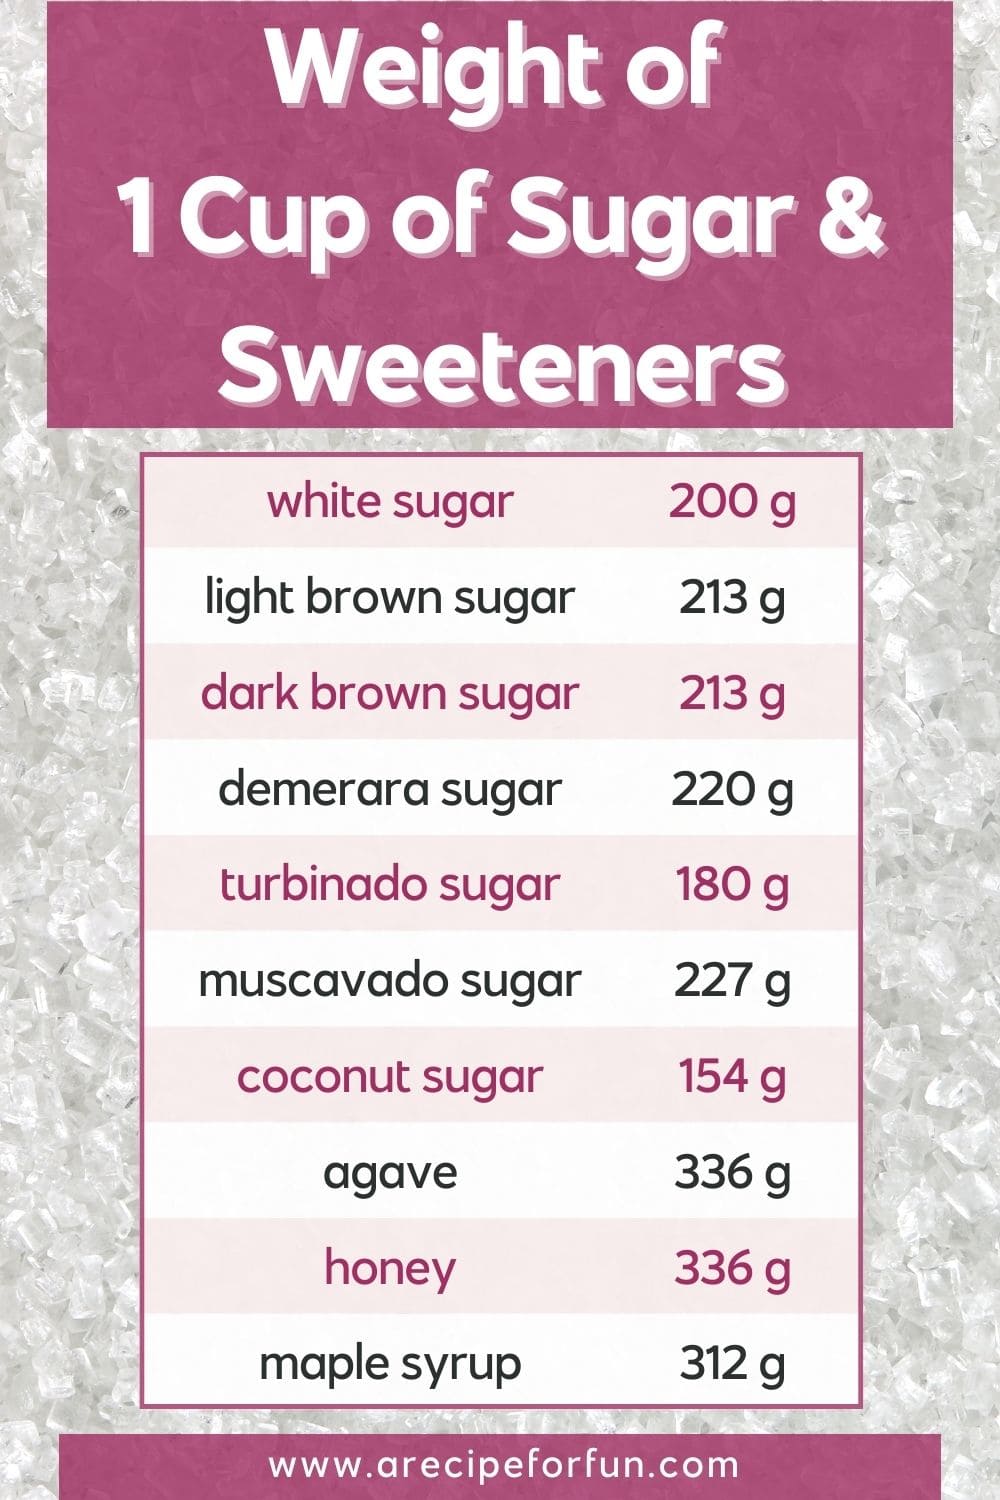 Infographic sharing the weights of sugars and sweeteners per 1 cup of volume.